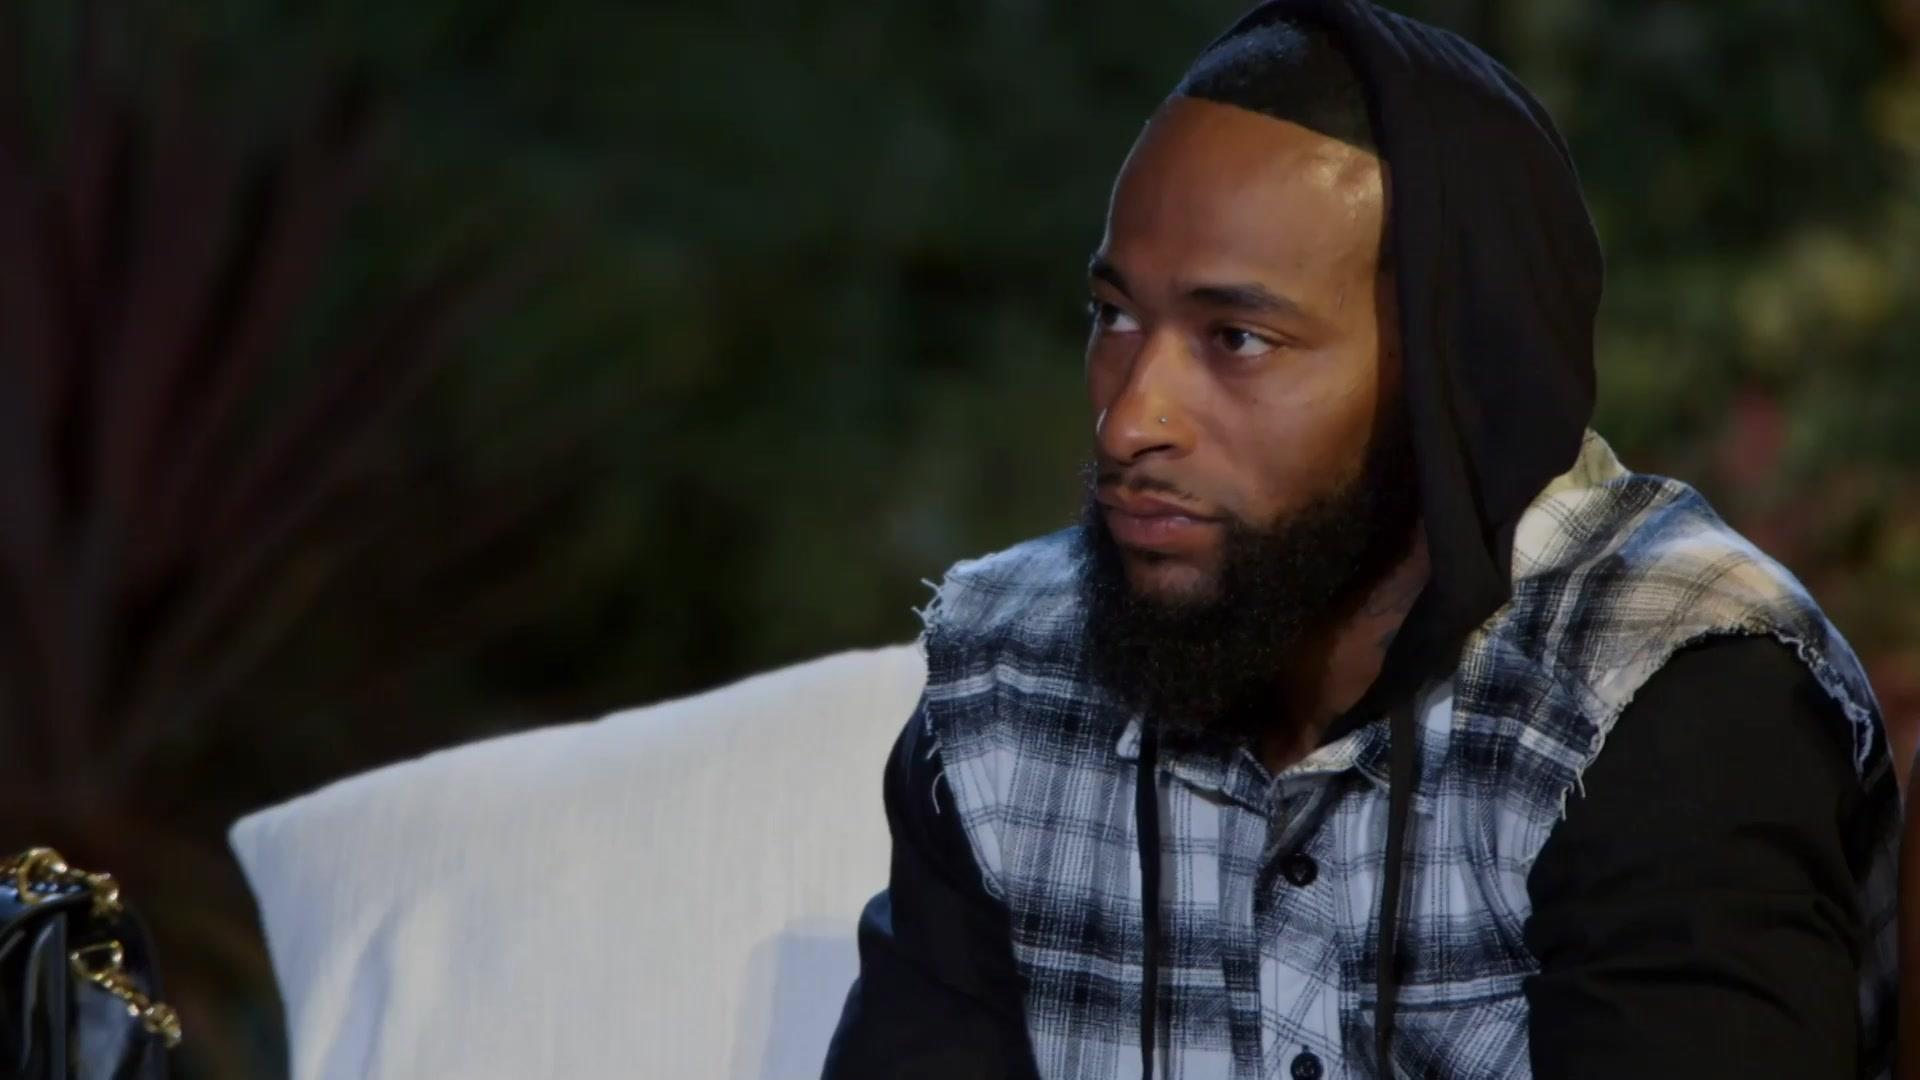 Watch Sneak Peek: Past Trauma Gets Exposed! | Marriage Boot Camp: Hip Hop Edition Video Extras